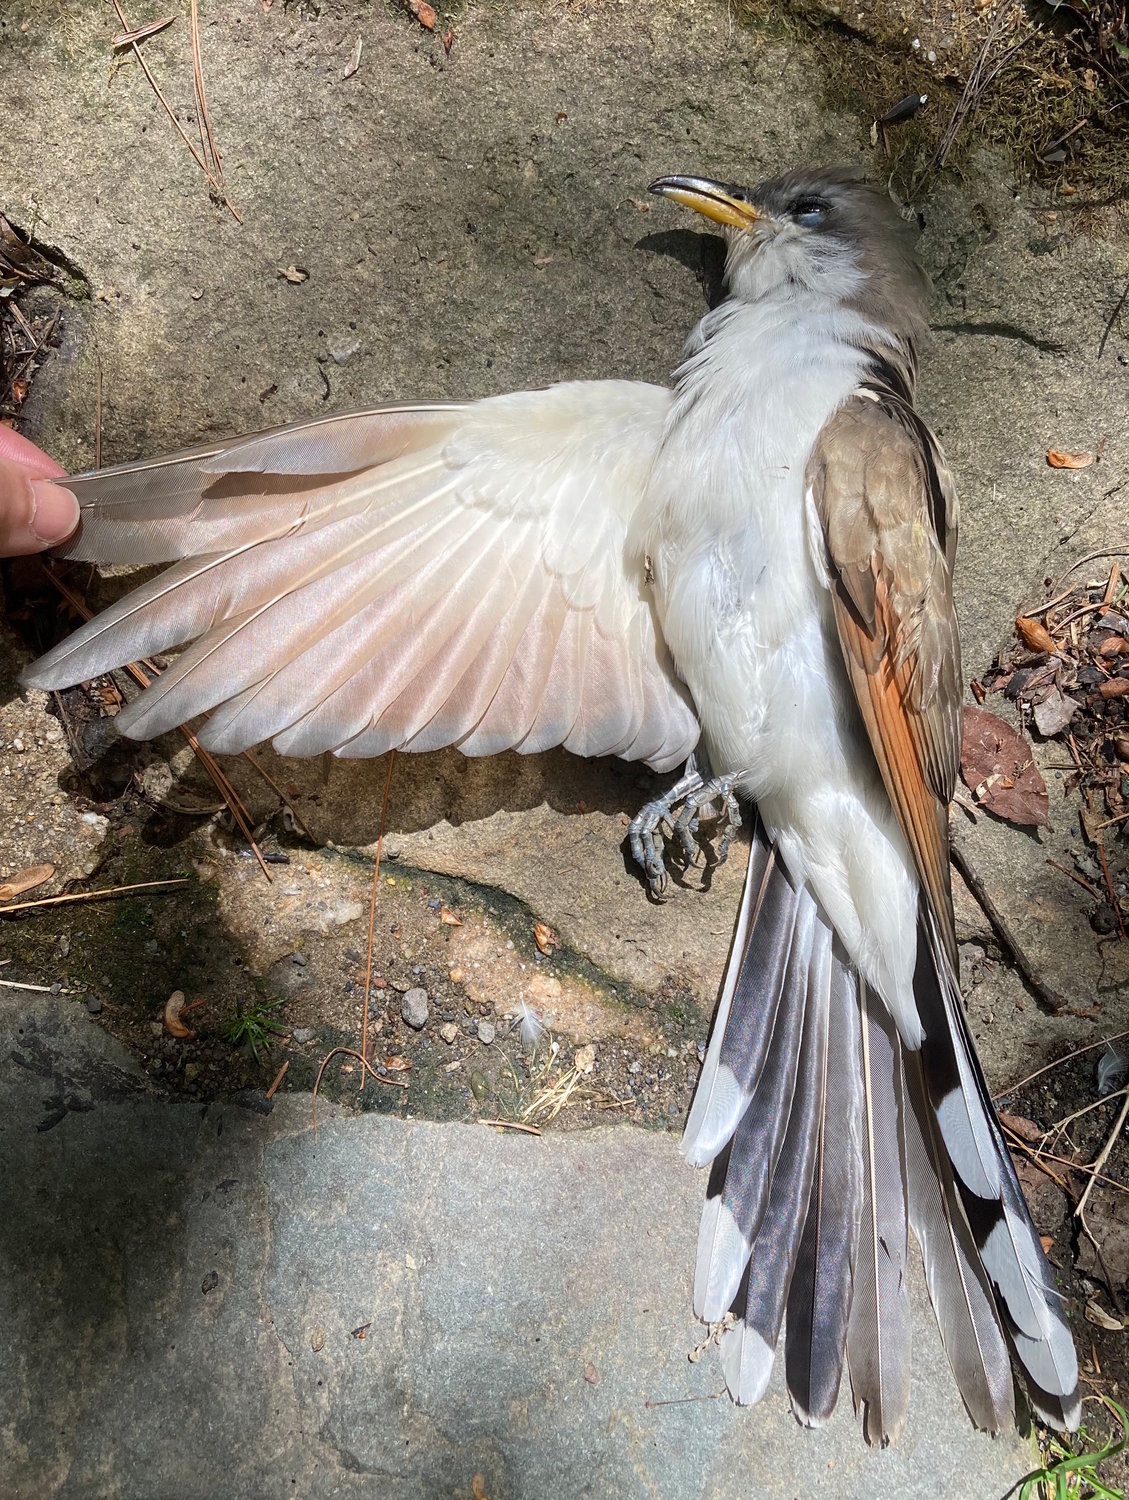 This yellow-billed cuckoo lost its life when it collided with a window. The normally elusive bird is hard to spot but has a recognizable repetitive call that can alert one to its presence. Cuckoos are especially beneficial as they consume large quantities of hairy caterpillars such as the gypsy moth and tent caterpillars, which are damaging trees in the Upper Delaware River region. Cuckoos are jay-sized birds ranging between 10 1/2 to 12 1/2 inches, with slender bodies that are feathered brown above and white below. They have slightly curved bills with yellow lower mandibles.